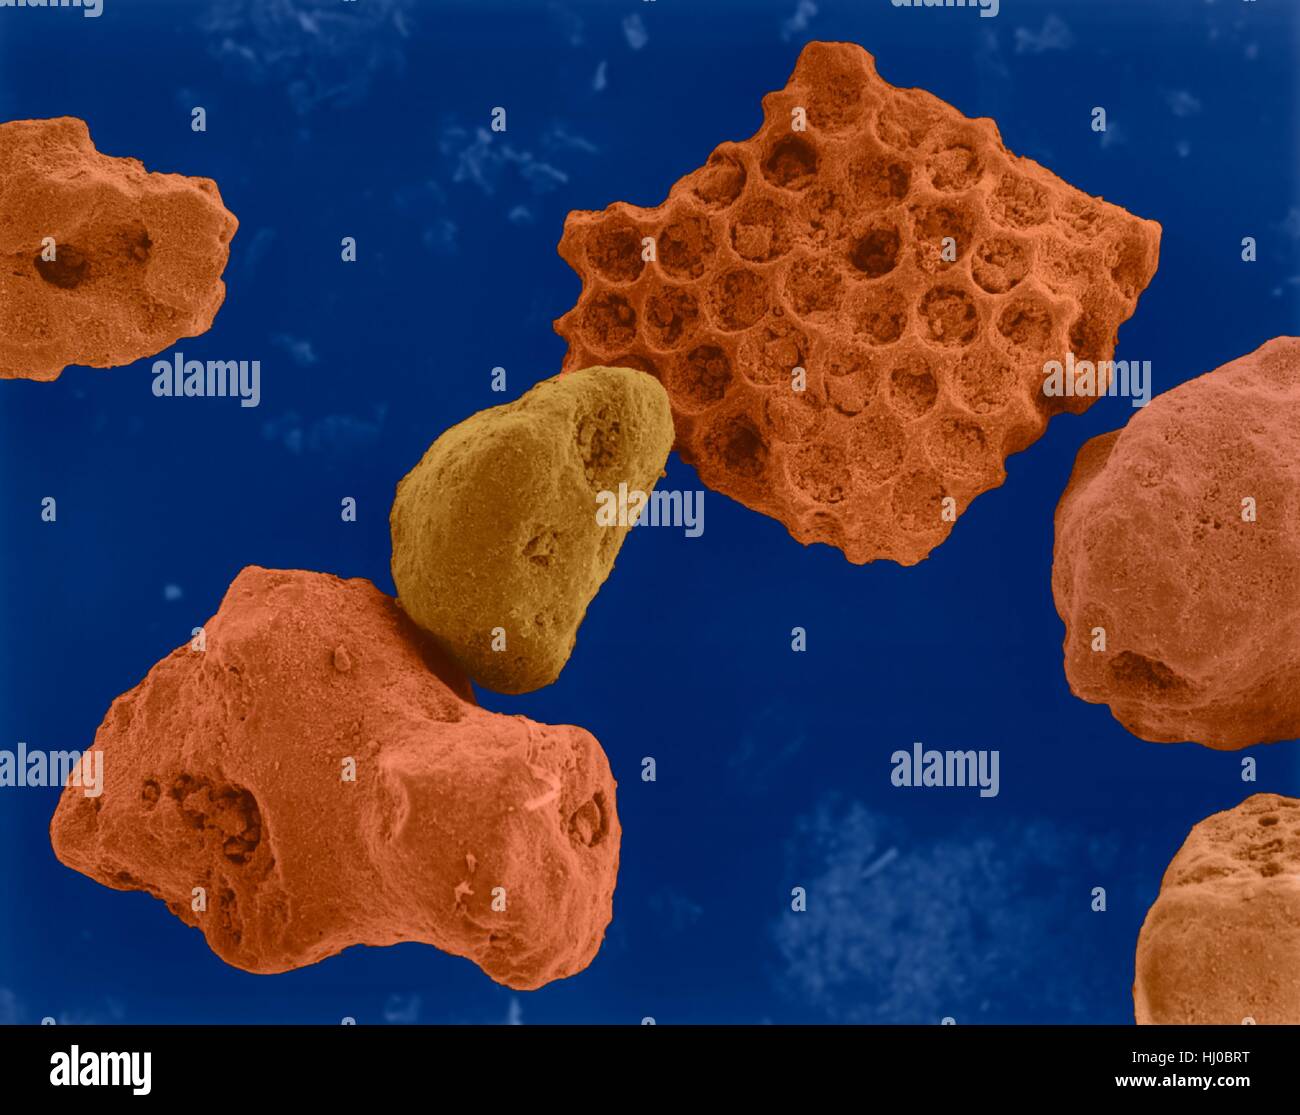 Coloured scanning electron micrograph (SEM) of Coral sand (Kailua, Hawaii). Beach sand contains both rock minerals and skeletons that have been derived from living organisms (such as coral). Sand grains produced from coral have fine holes and are smoother due to wearing down by the surface action. Magnification: x43 when shortest axis printed at 25 millimetres. Stock Photo